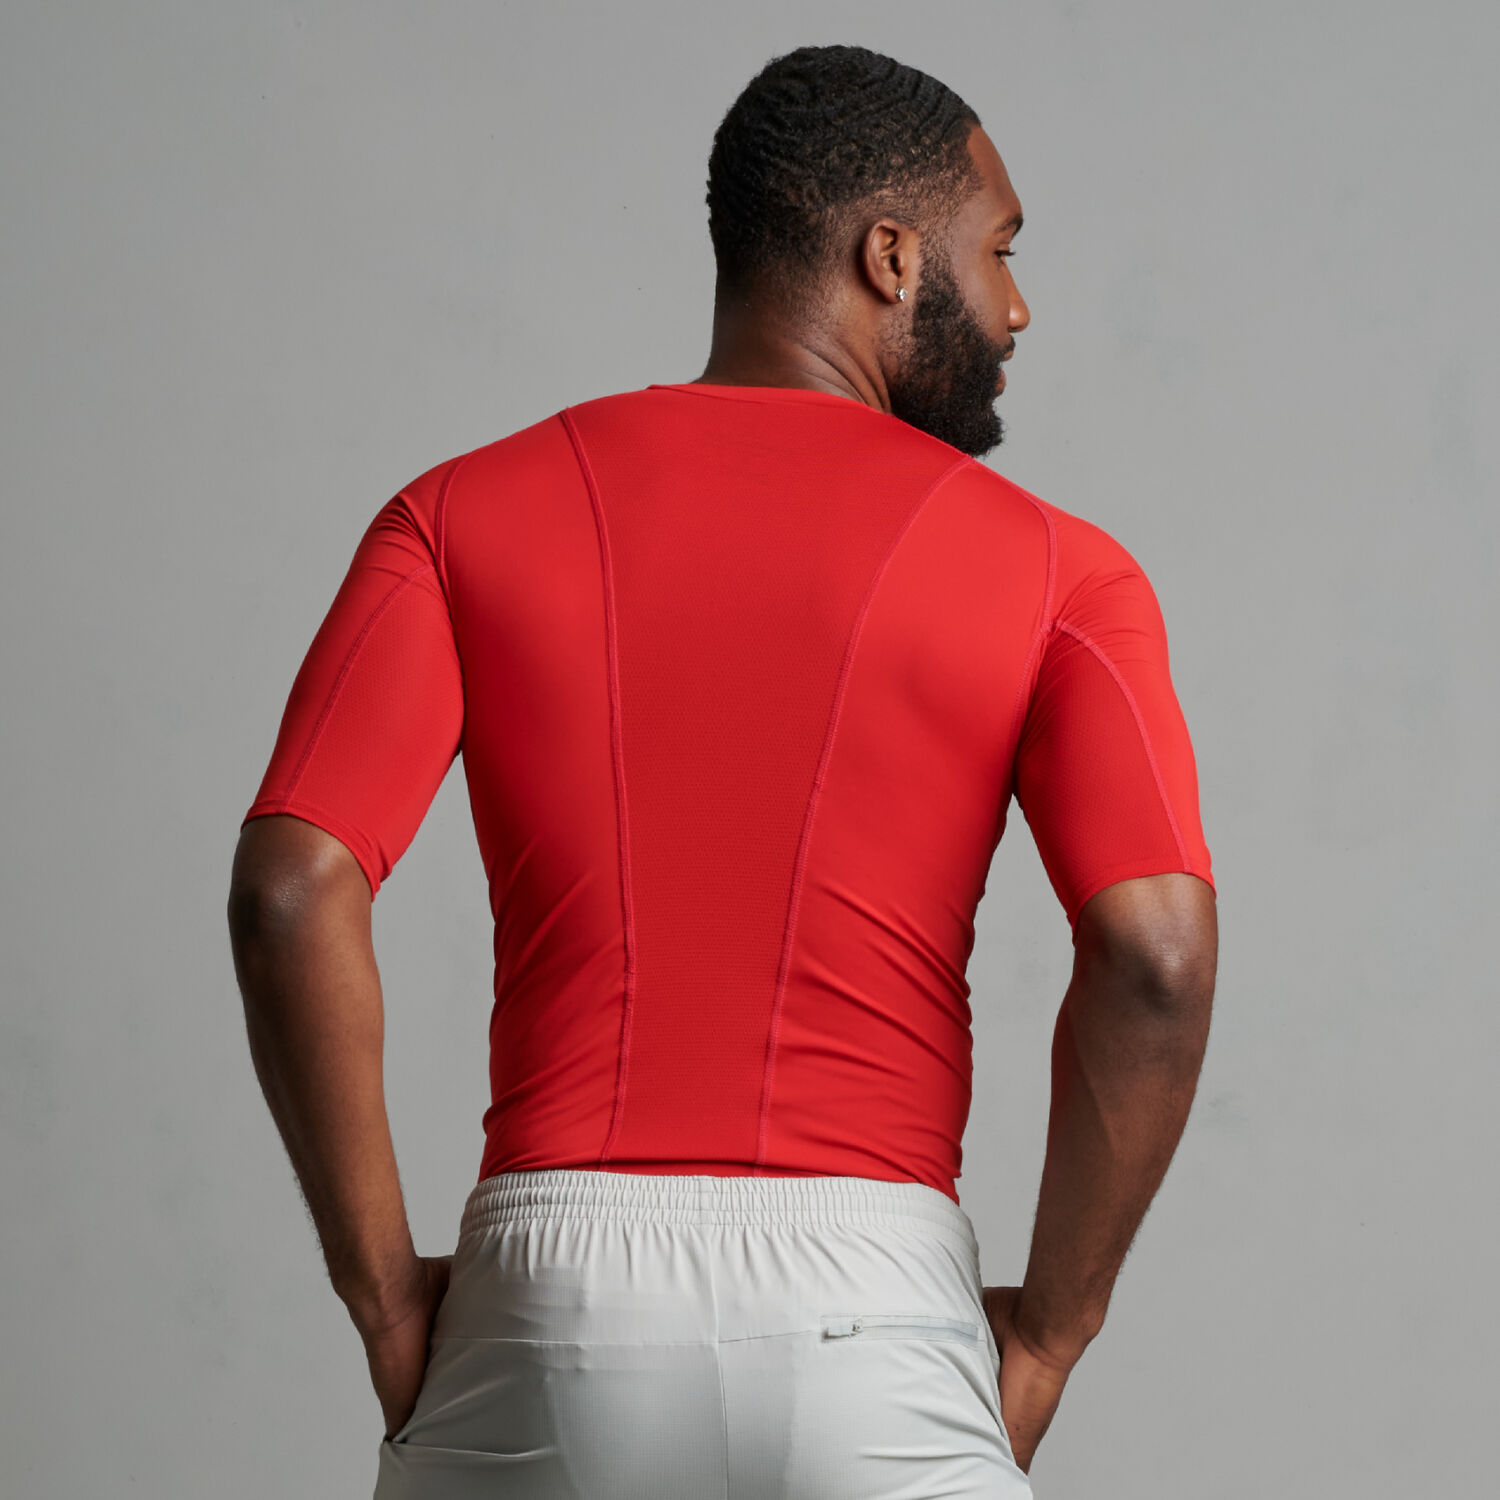 Men's CoolCore® Long Sleeve Compression T-Shirt